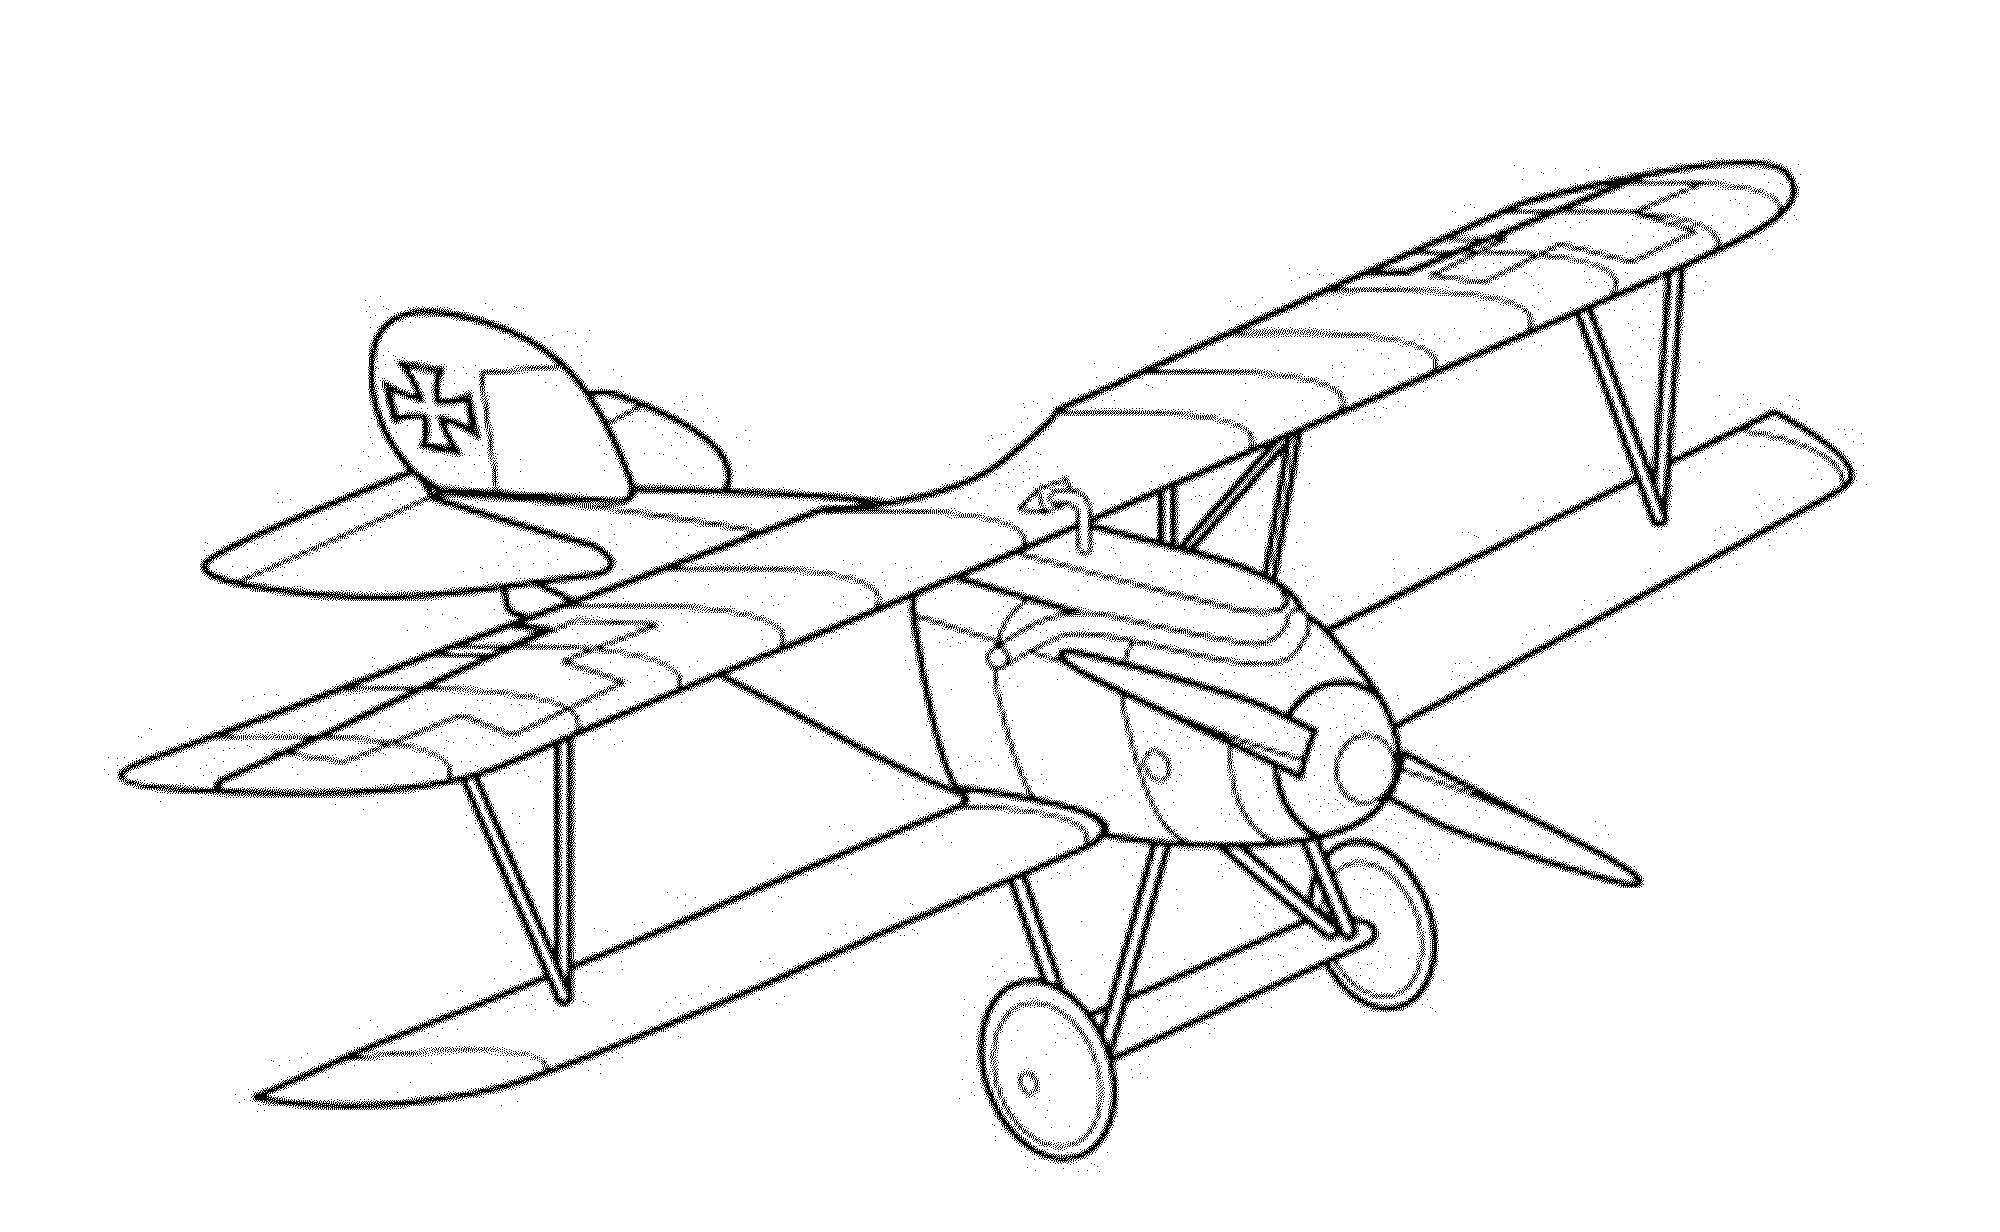 Coloring Enemy aircraft. Category The planes. Tags:  Plane.